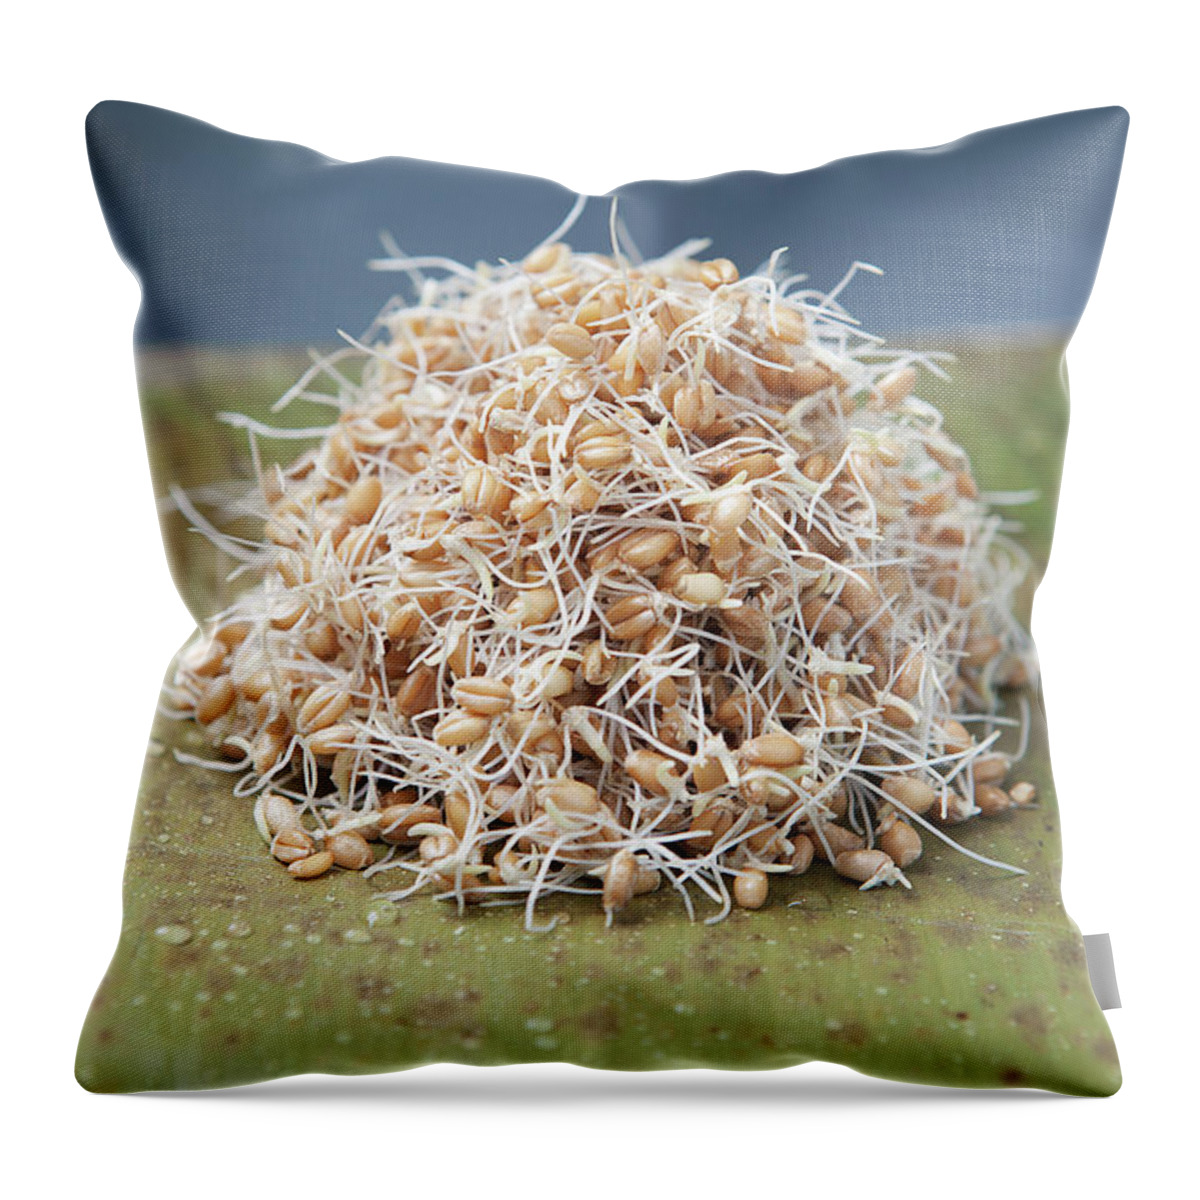 Heap Throw Pillow featuring the photograph Close Up Of Pile Of Sprouts by Laurie Castelli